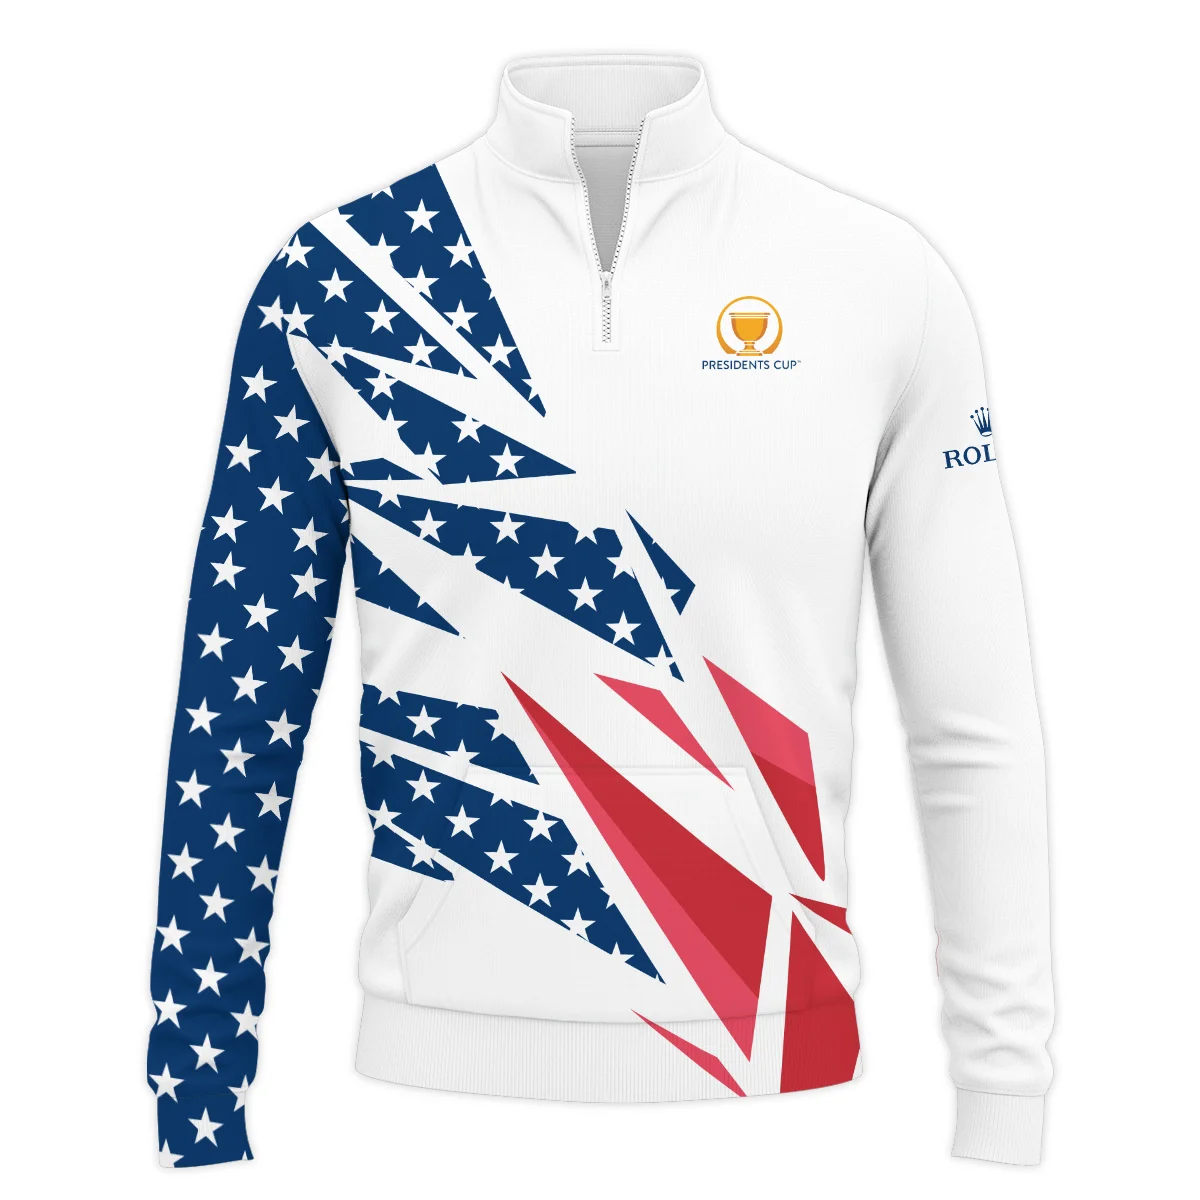 Flag American Cup Presidents Cup Rolex Quarter-Zip Jacket All Over Prints QTPR2606A1ROXSWZ